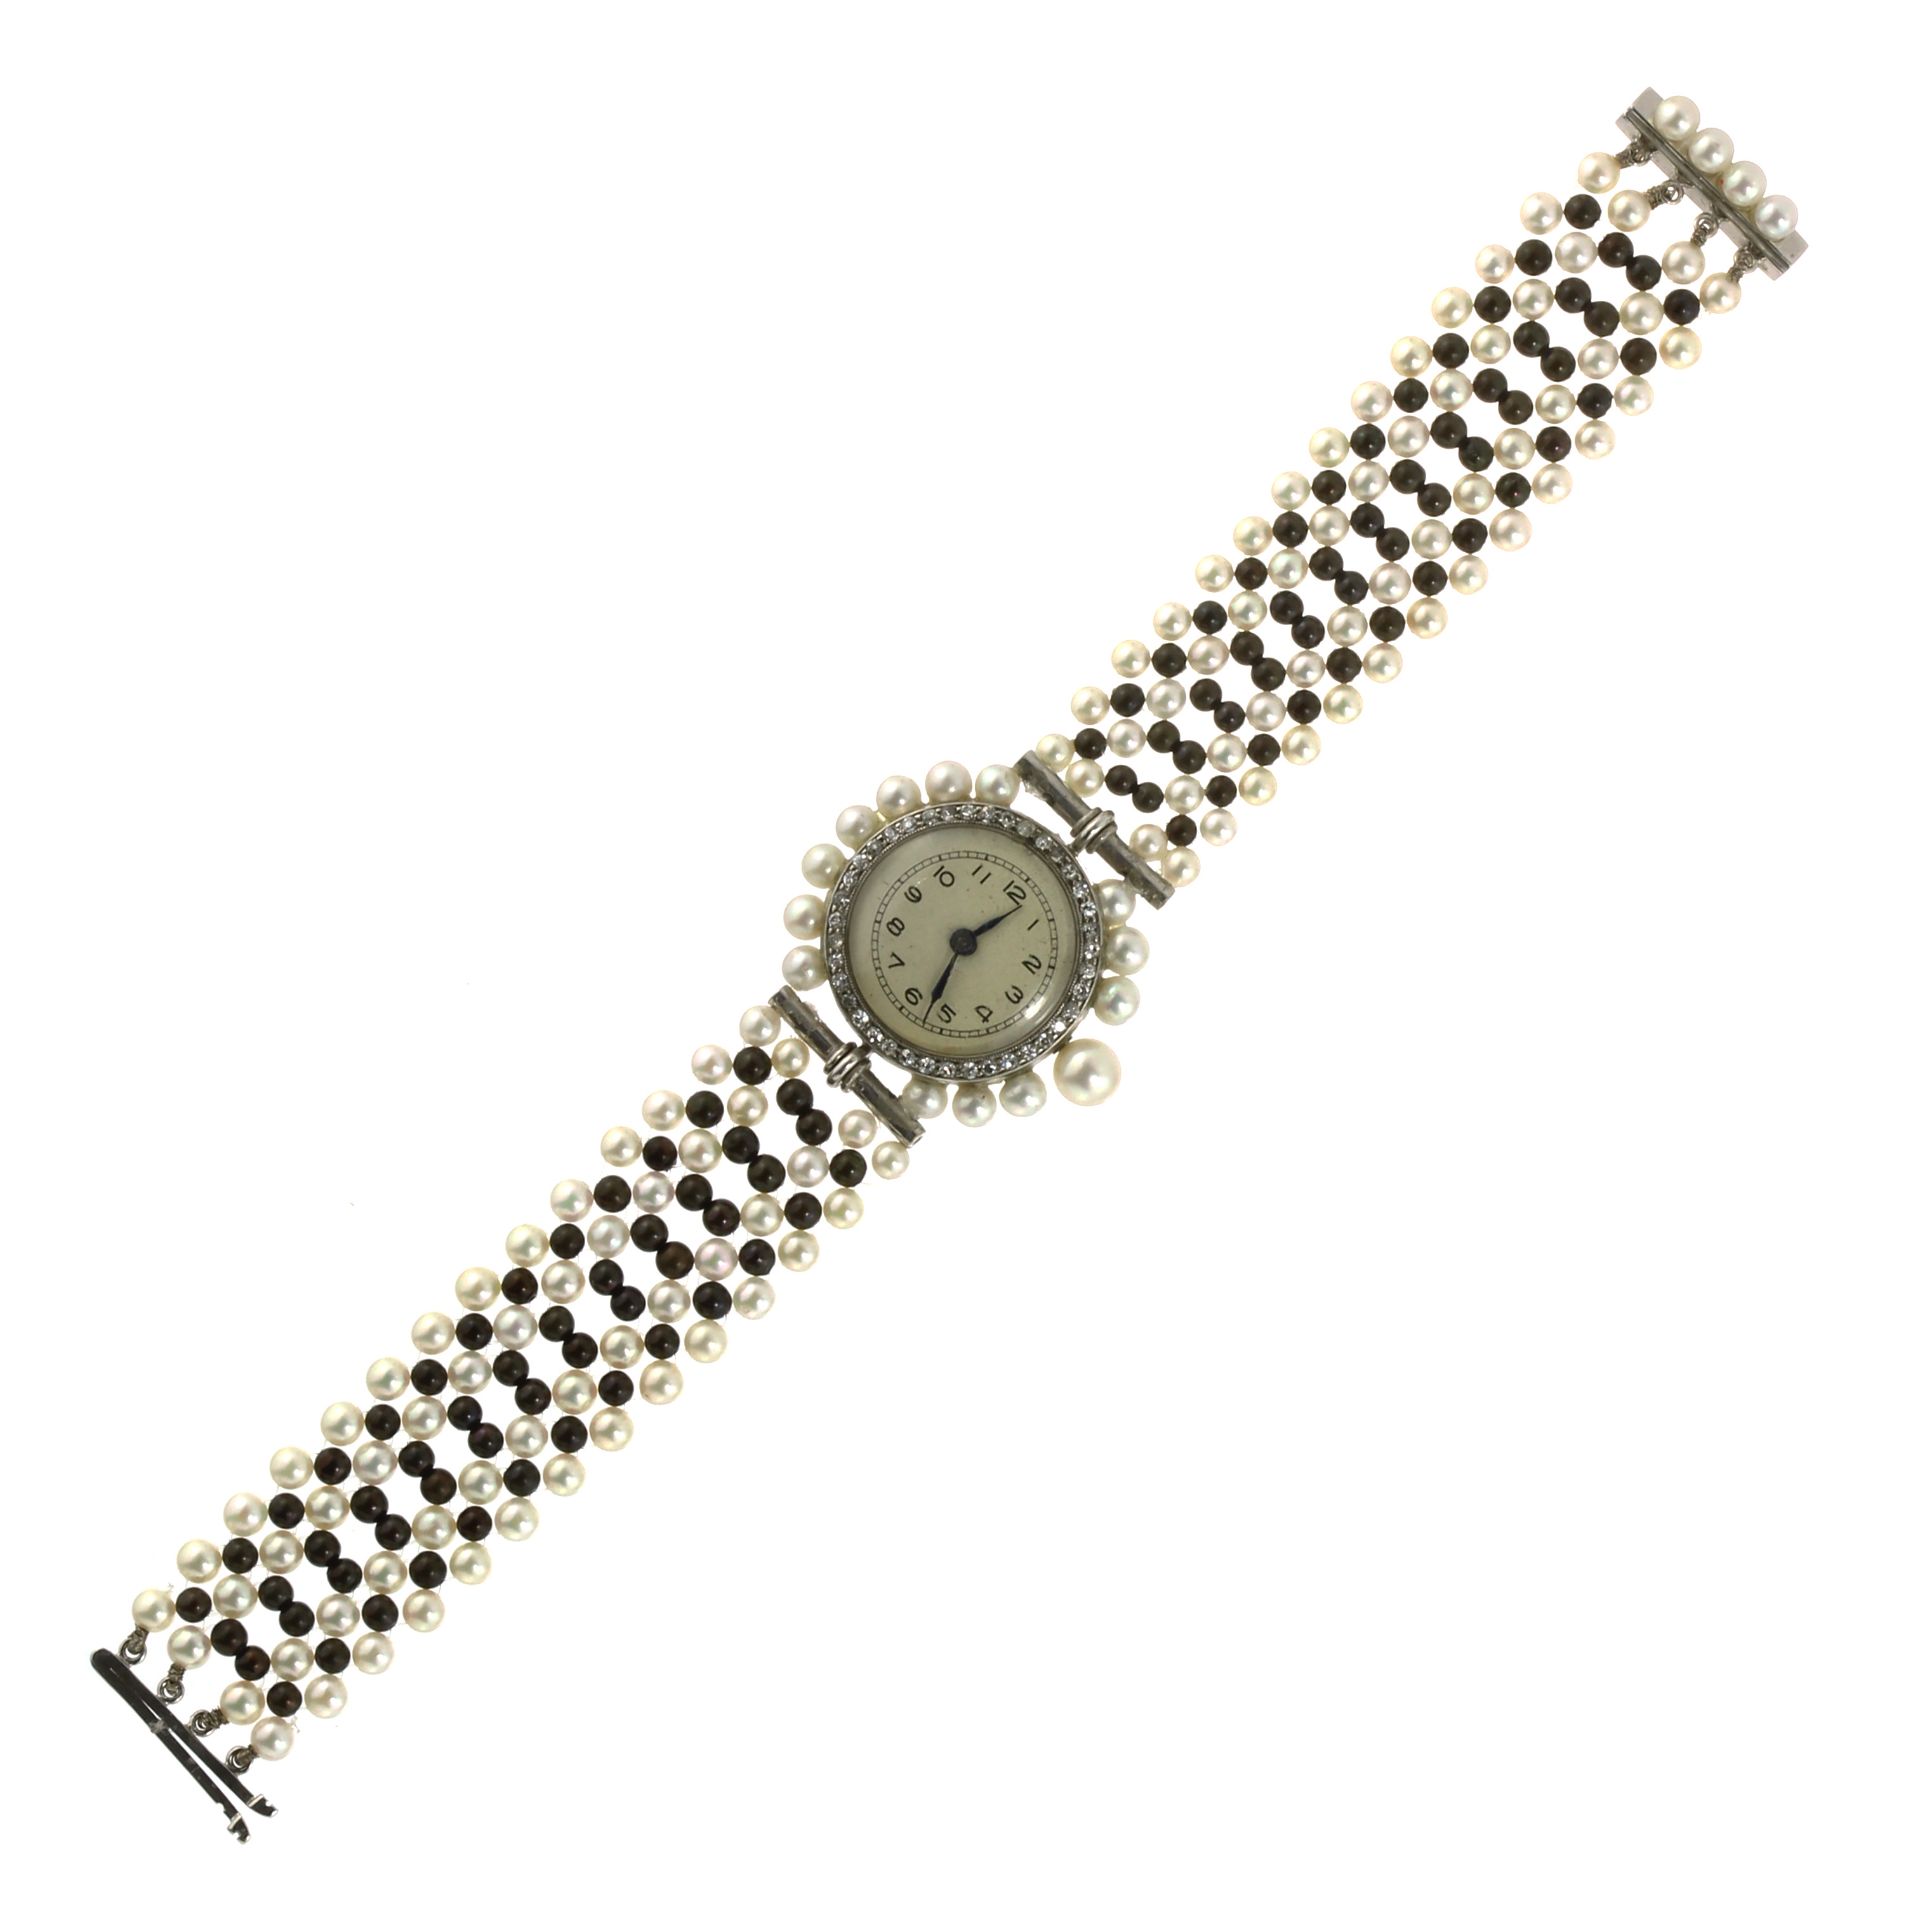 A PEARL AND DIAMOND COCKTAIL WATCH, CIRCA 1935 in 14ct white gold, the circular dial jewelled around